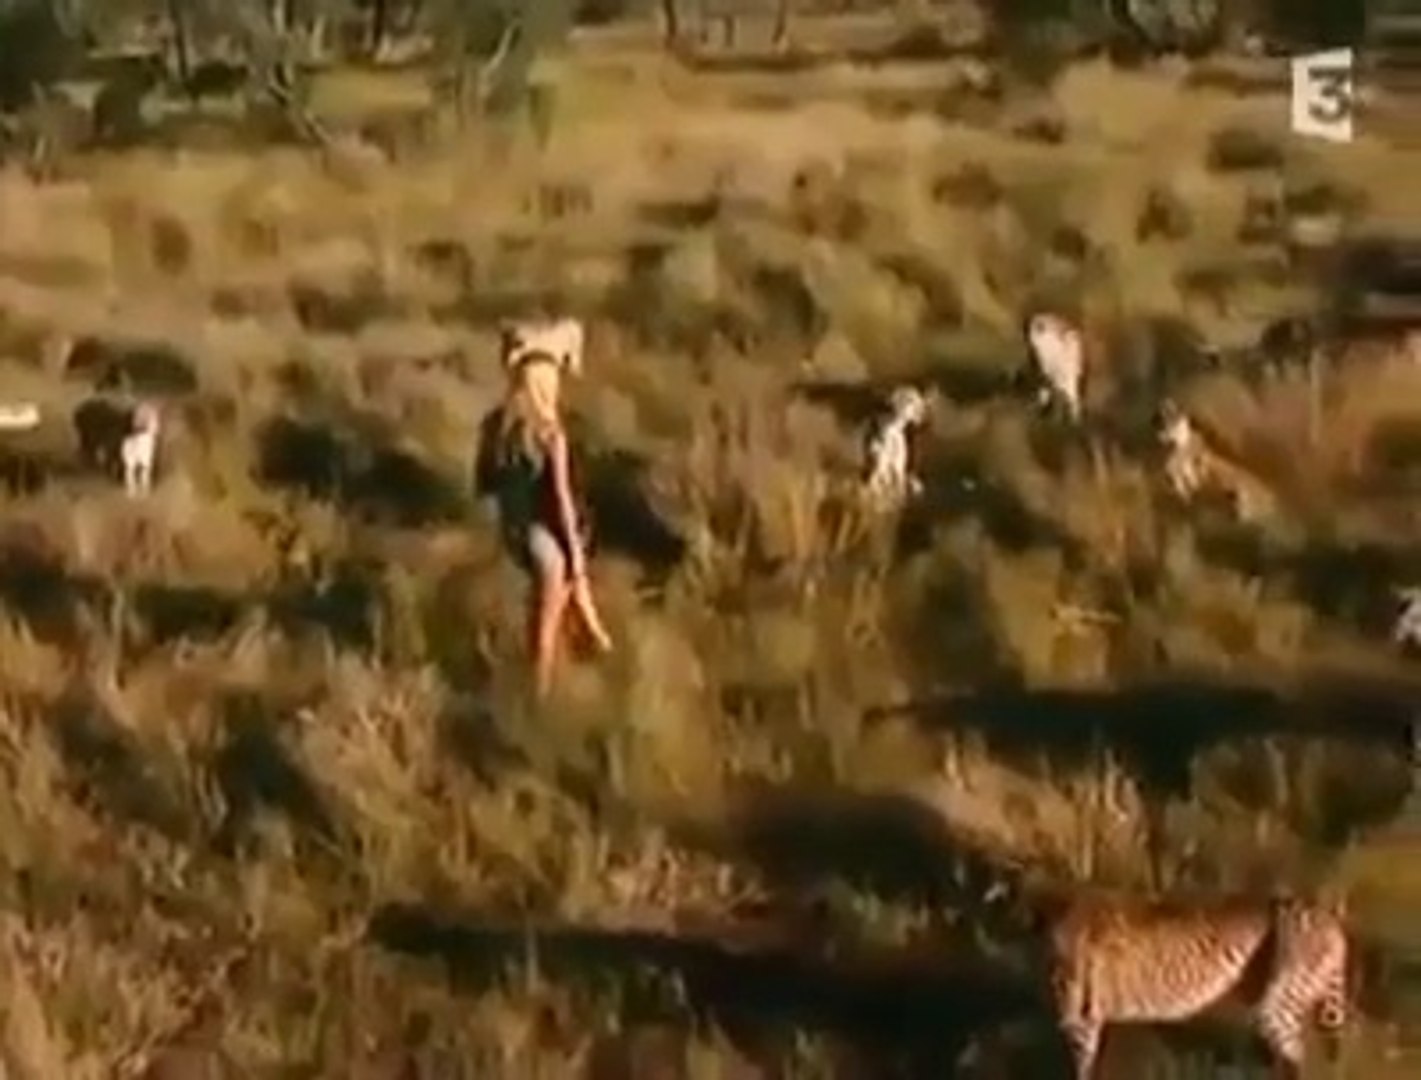 Brave Girl With 10 Cheetahs...